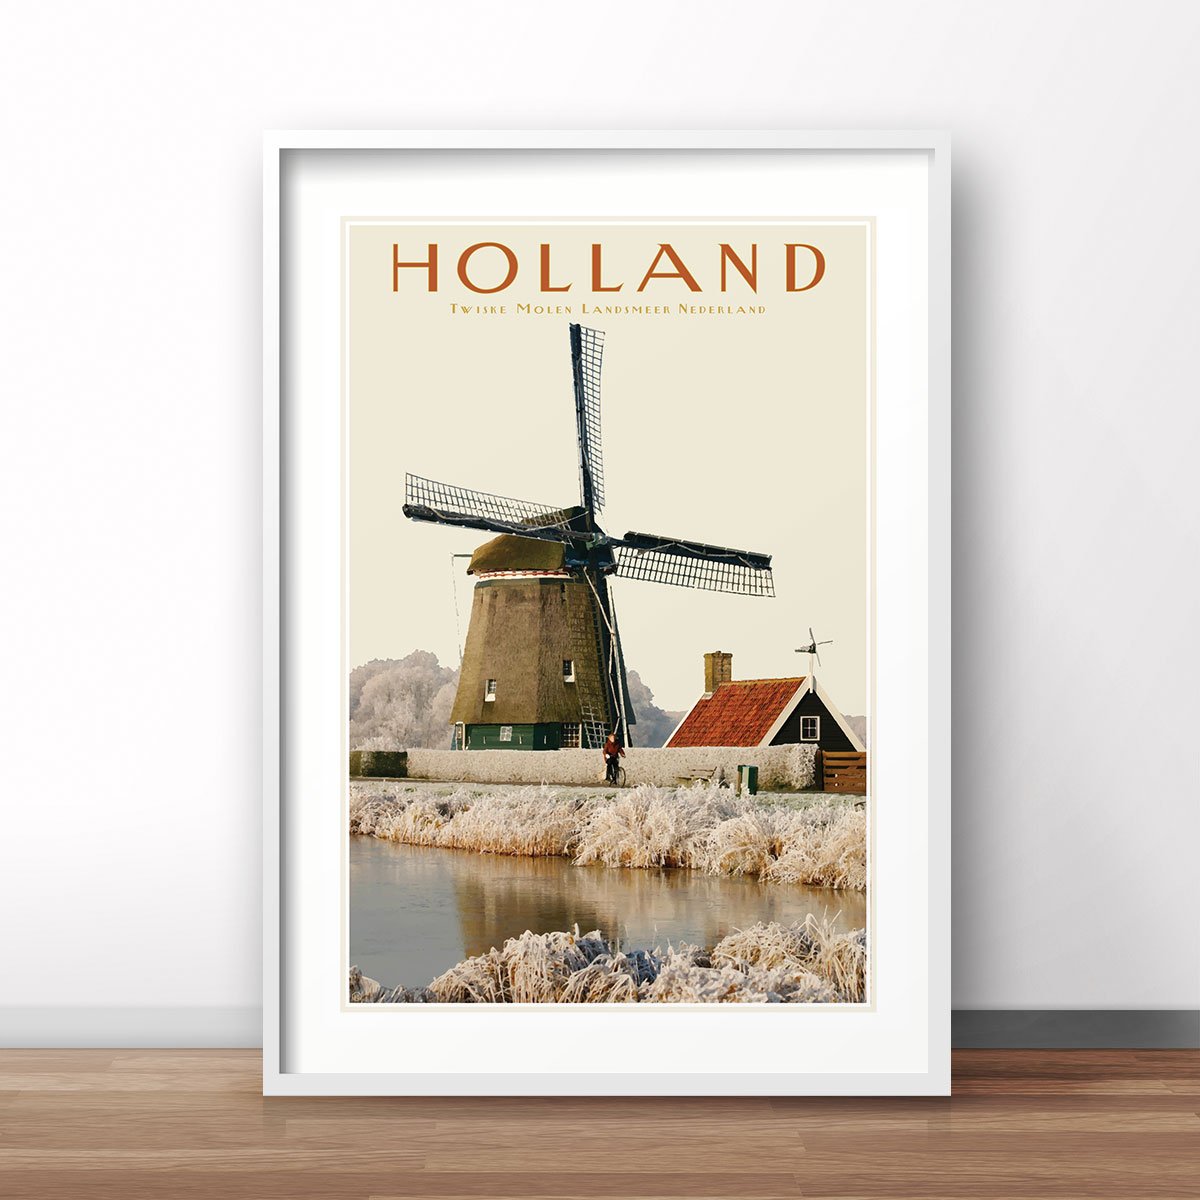 North Holland Windmill print. Vintage travel style poster. Original design by places we luv